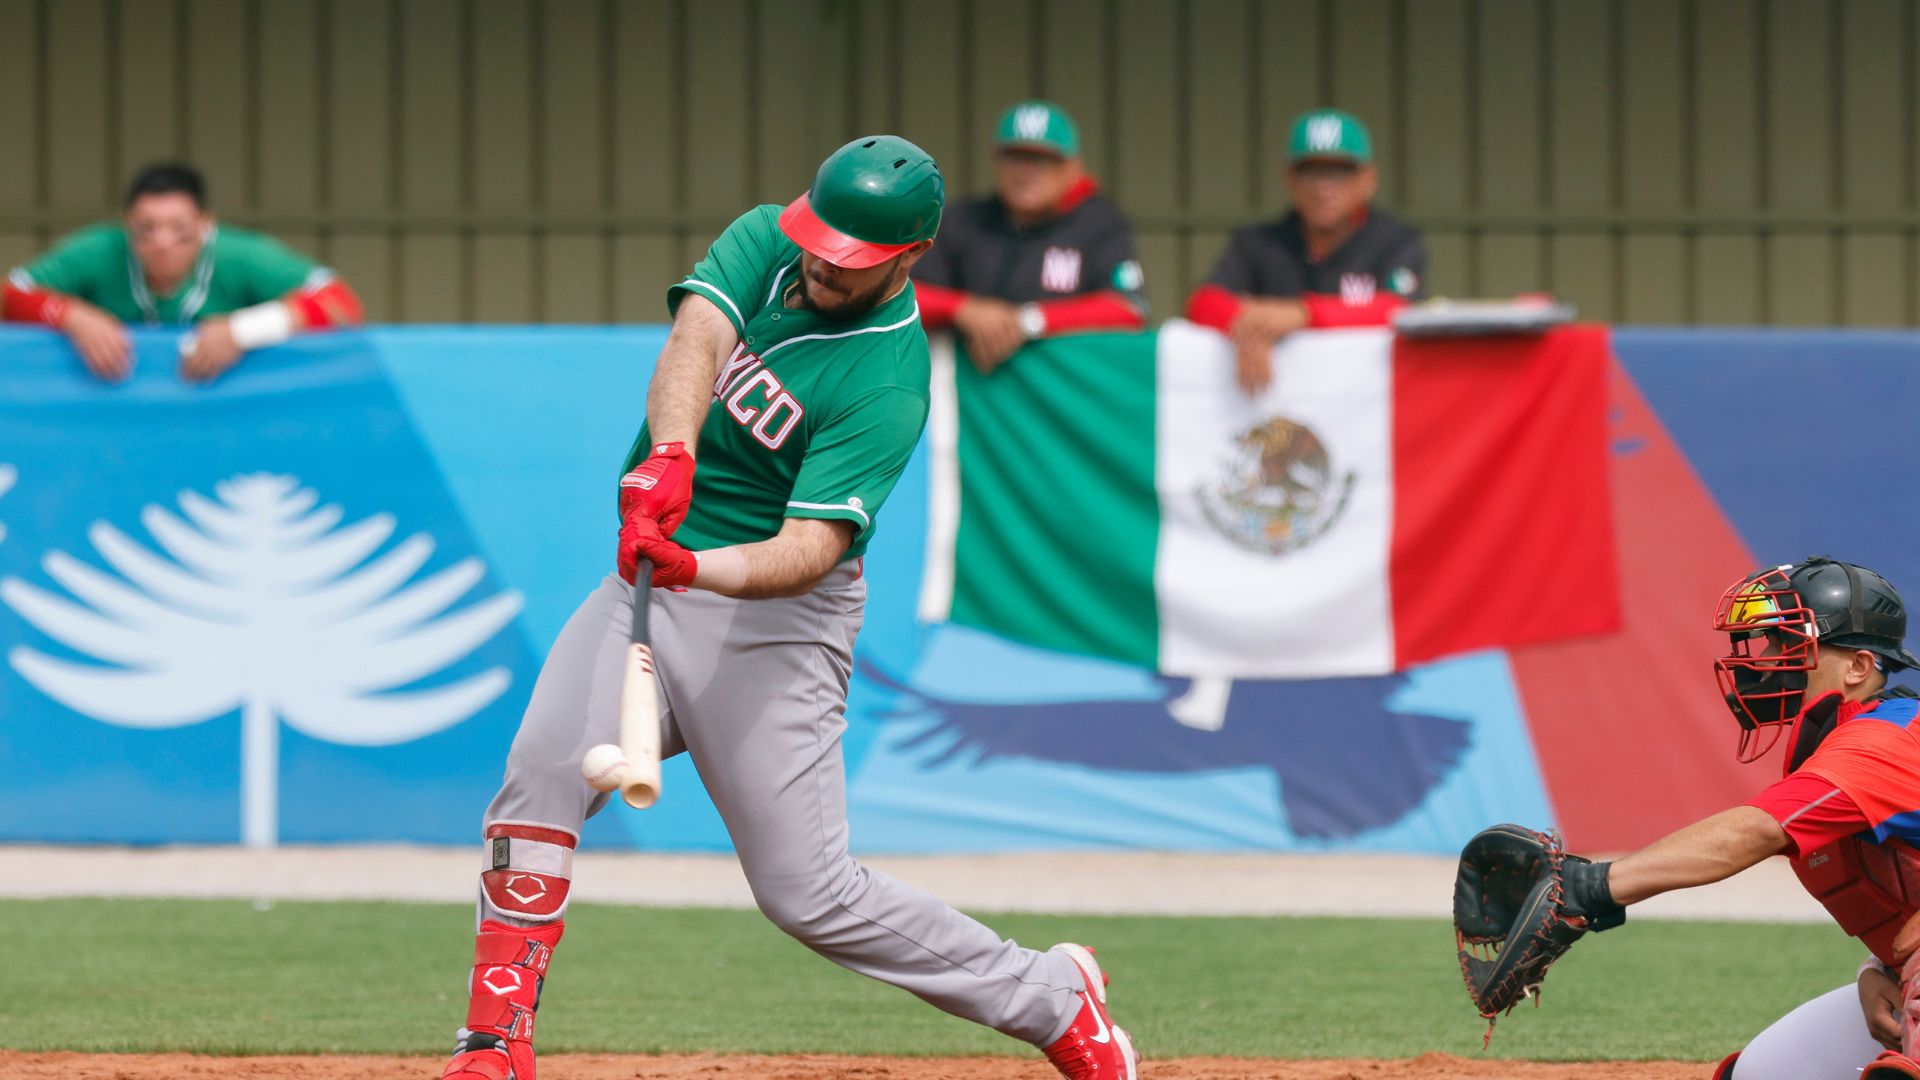 Mexico remains strong in baseball and defeats Dominican Republic in Cerrillos